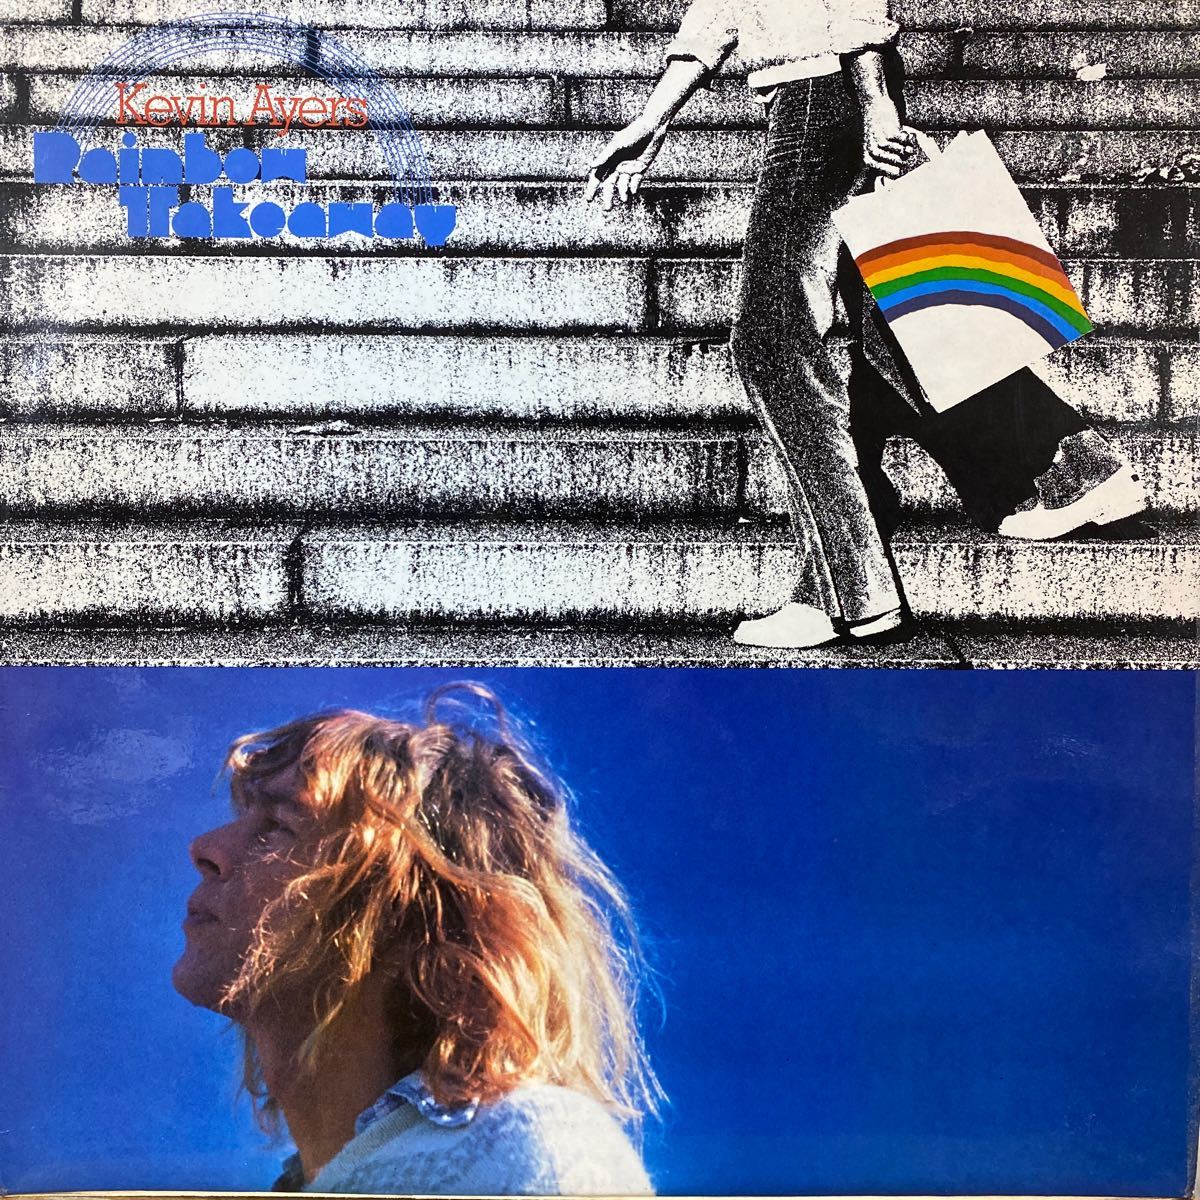 UK HARVEST原盤 初回MAT★KEVIN AYERS/RAINBOW TAKEAWAY ケヴィン・エアーズ オリー・ハルソール アンソニー・ムーア ソフト・マシーン_画像1